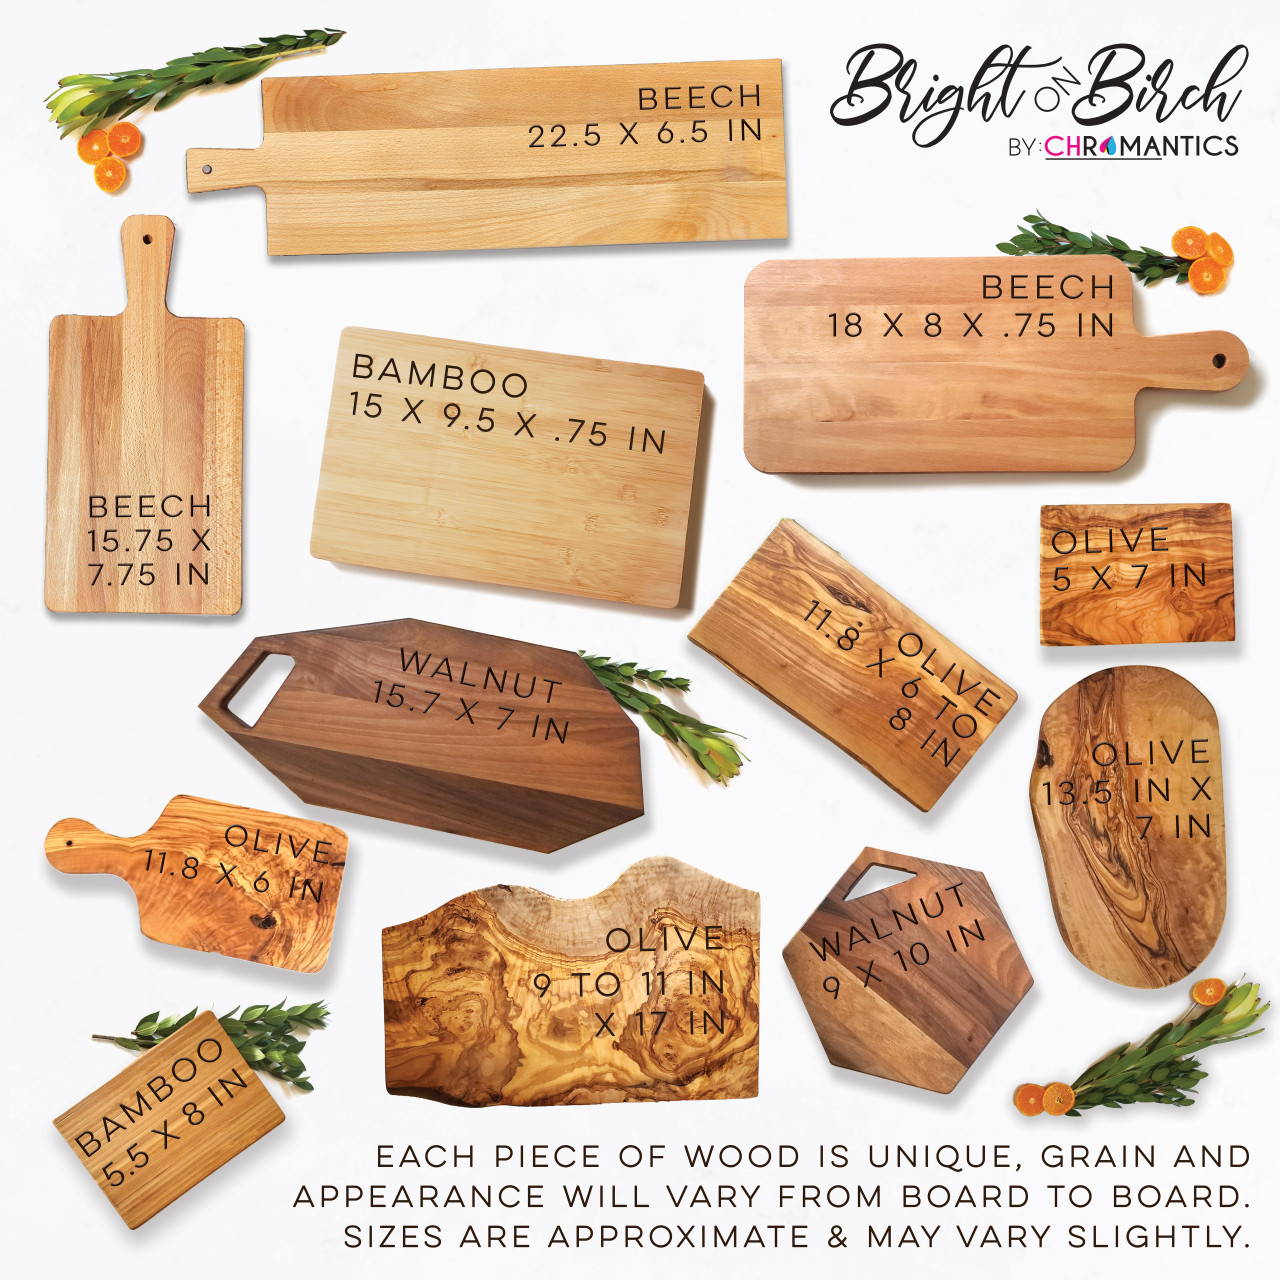 https://cdn11.bigcommerce.com/s-1ggeagg8hy/images/stencil/1280x1280/products/1083/3527/cutting-board-options-w-large-olive-long-bob__80279.1651082493.jpg?c=2?imbypass=on